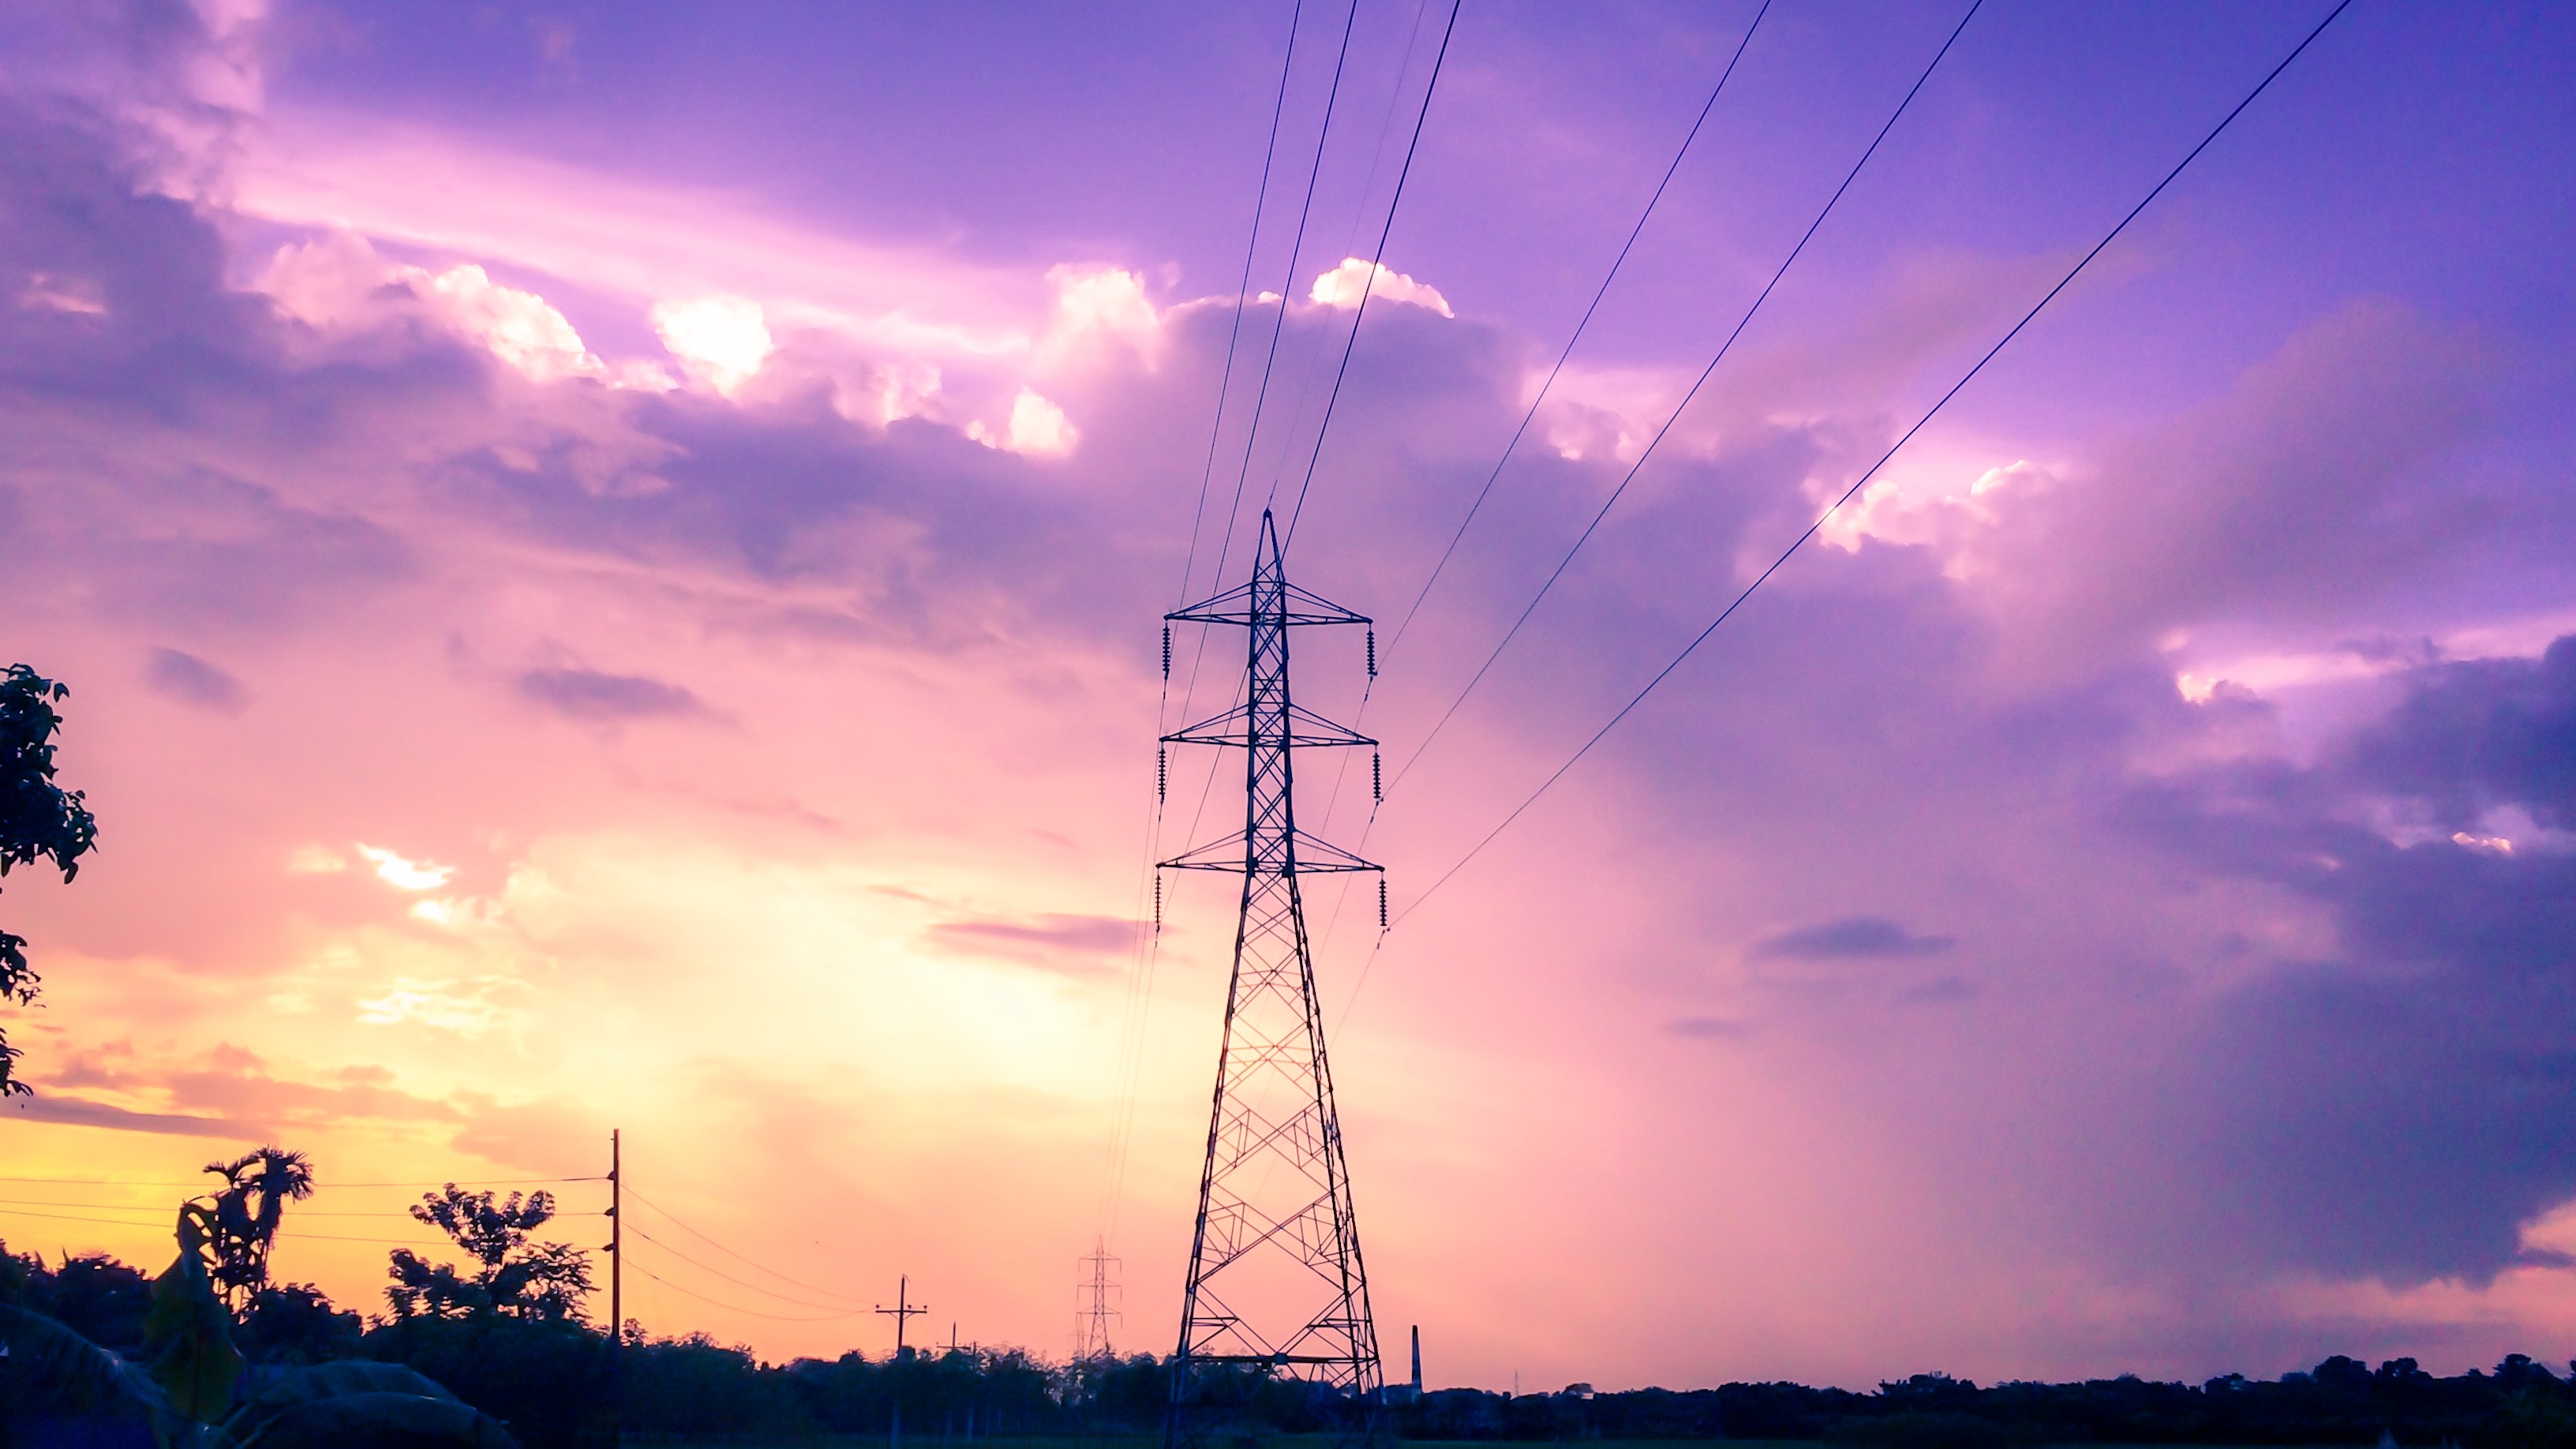 Photography of Electric Tower during Sunset, Clouds, Power lines, Voltage, Transmission, HQ Photo